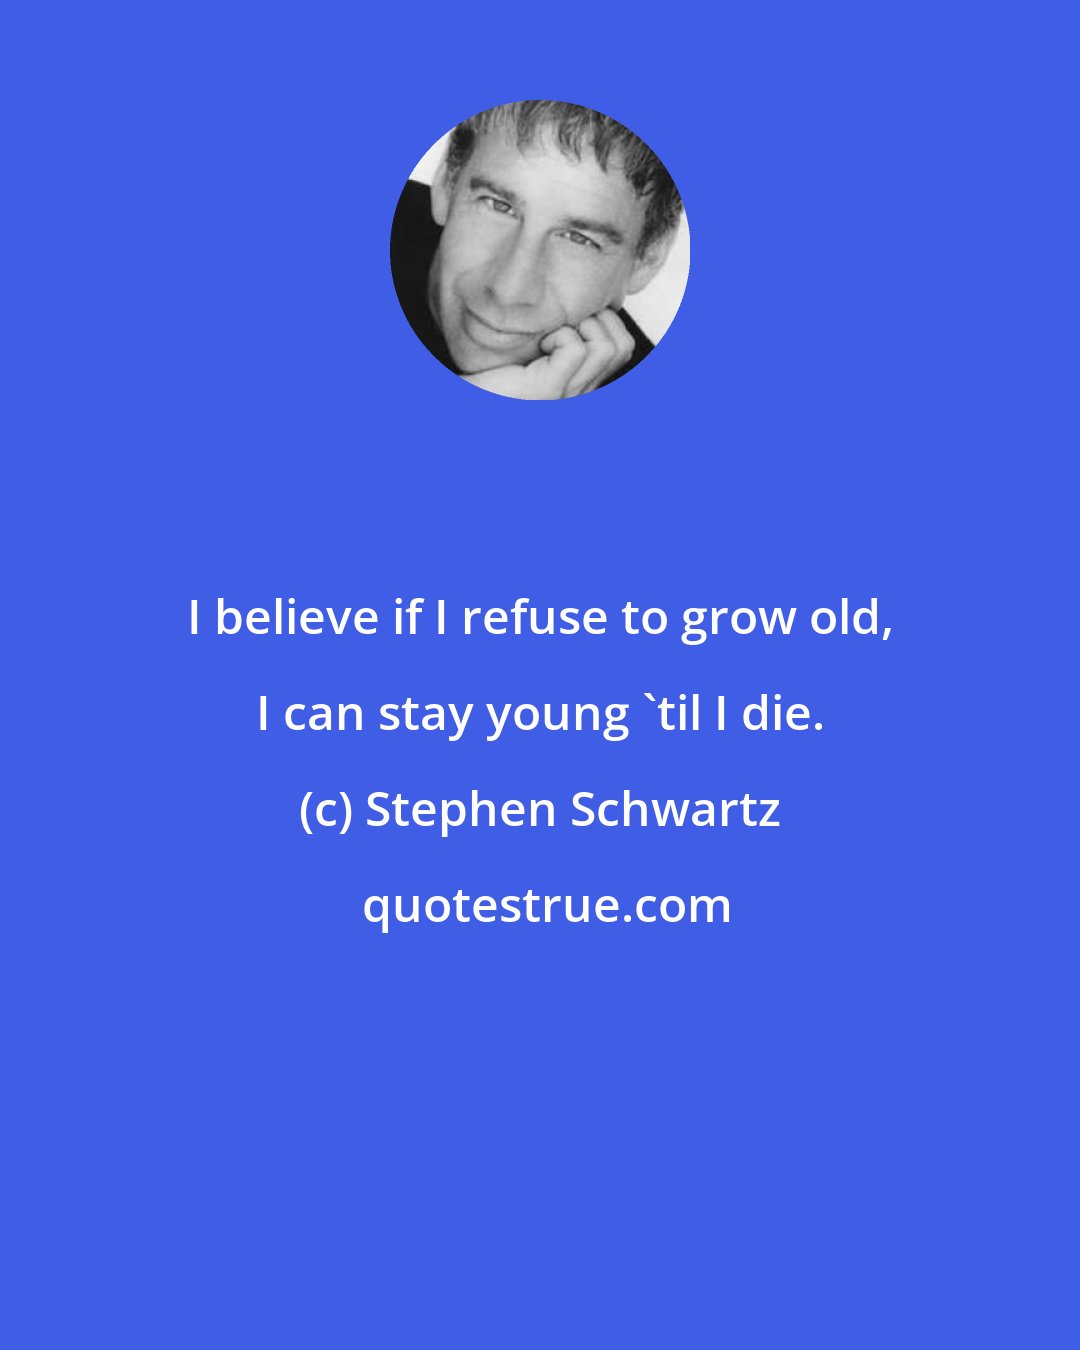 Stephen Schwartz: I believe if I refuse to grow old, I can stay young 'til I die.